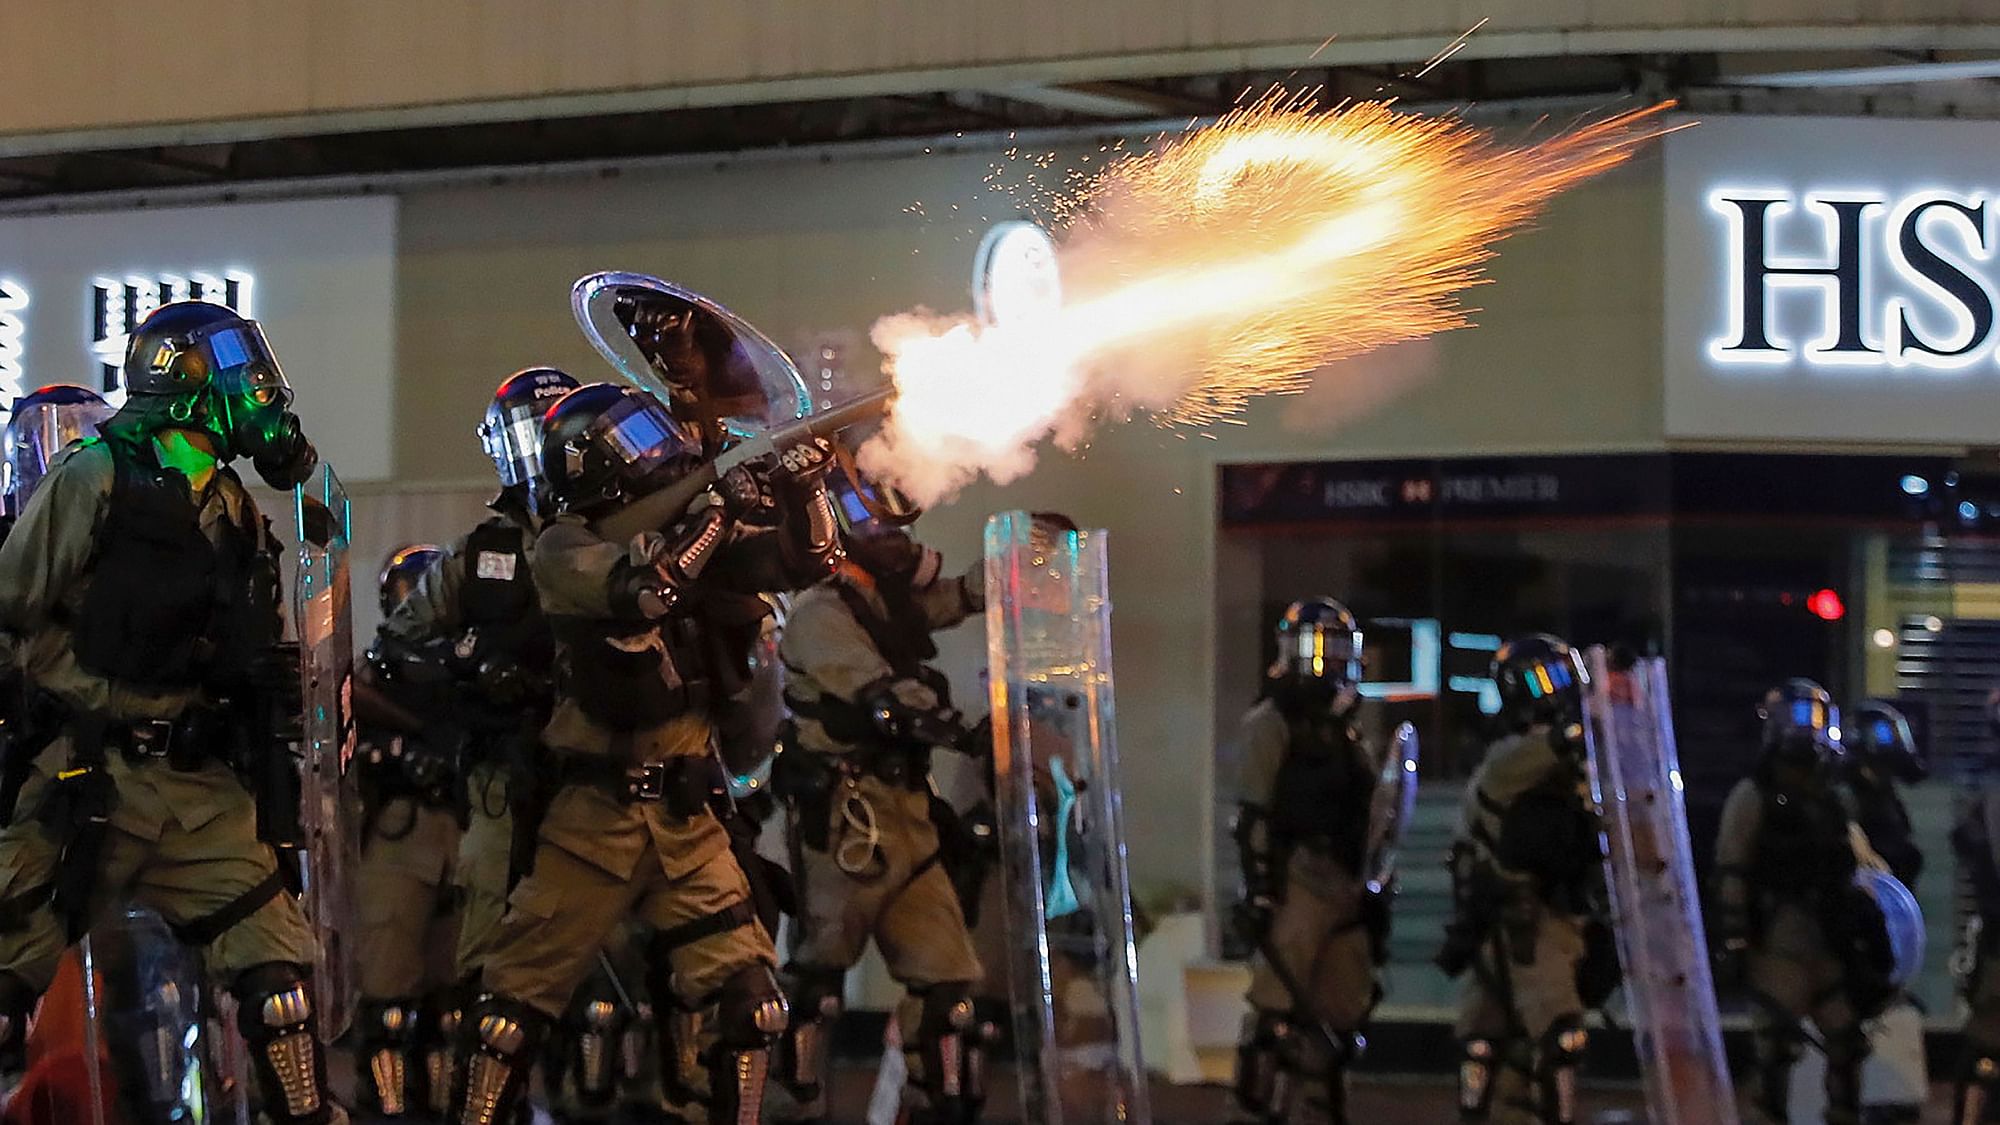 Police fire tear gas during the anti-extradition bill protest in Hong Kong.